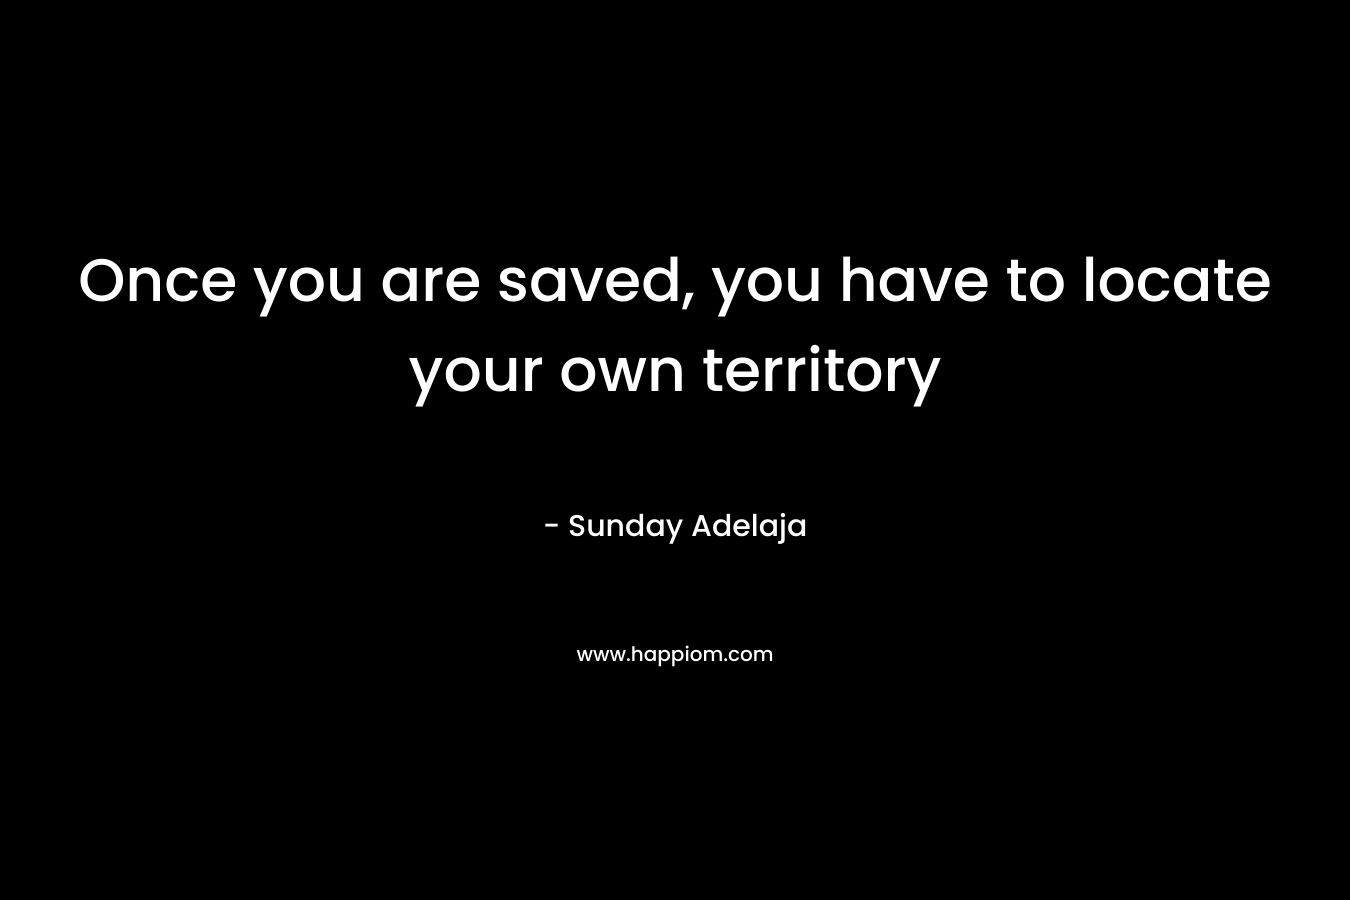 Once you are saved, you have to locate your own territory